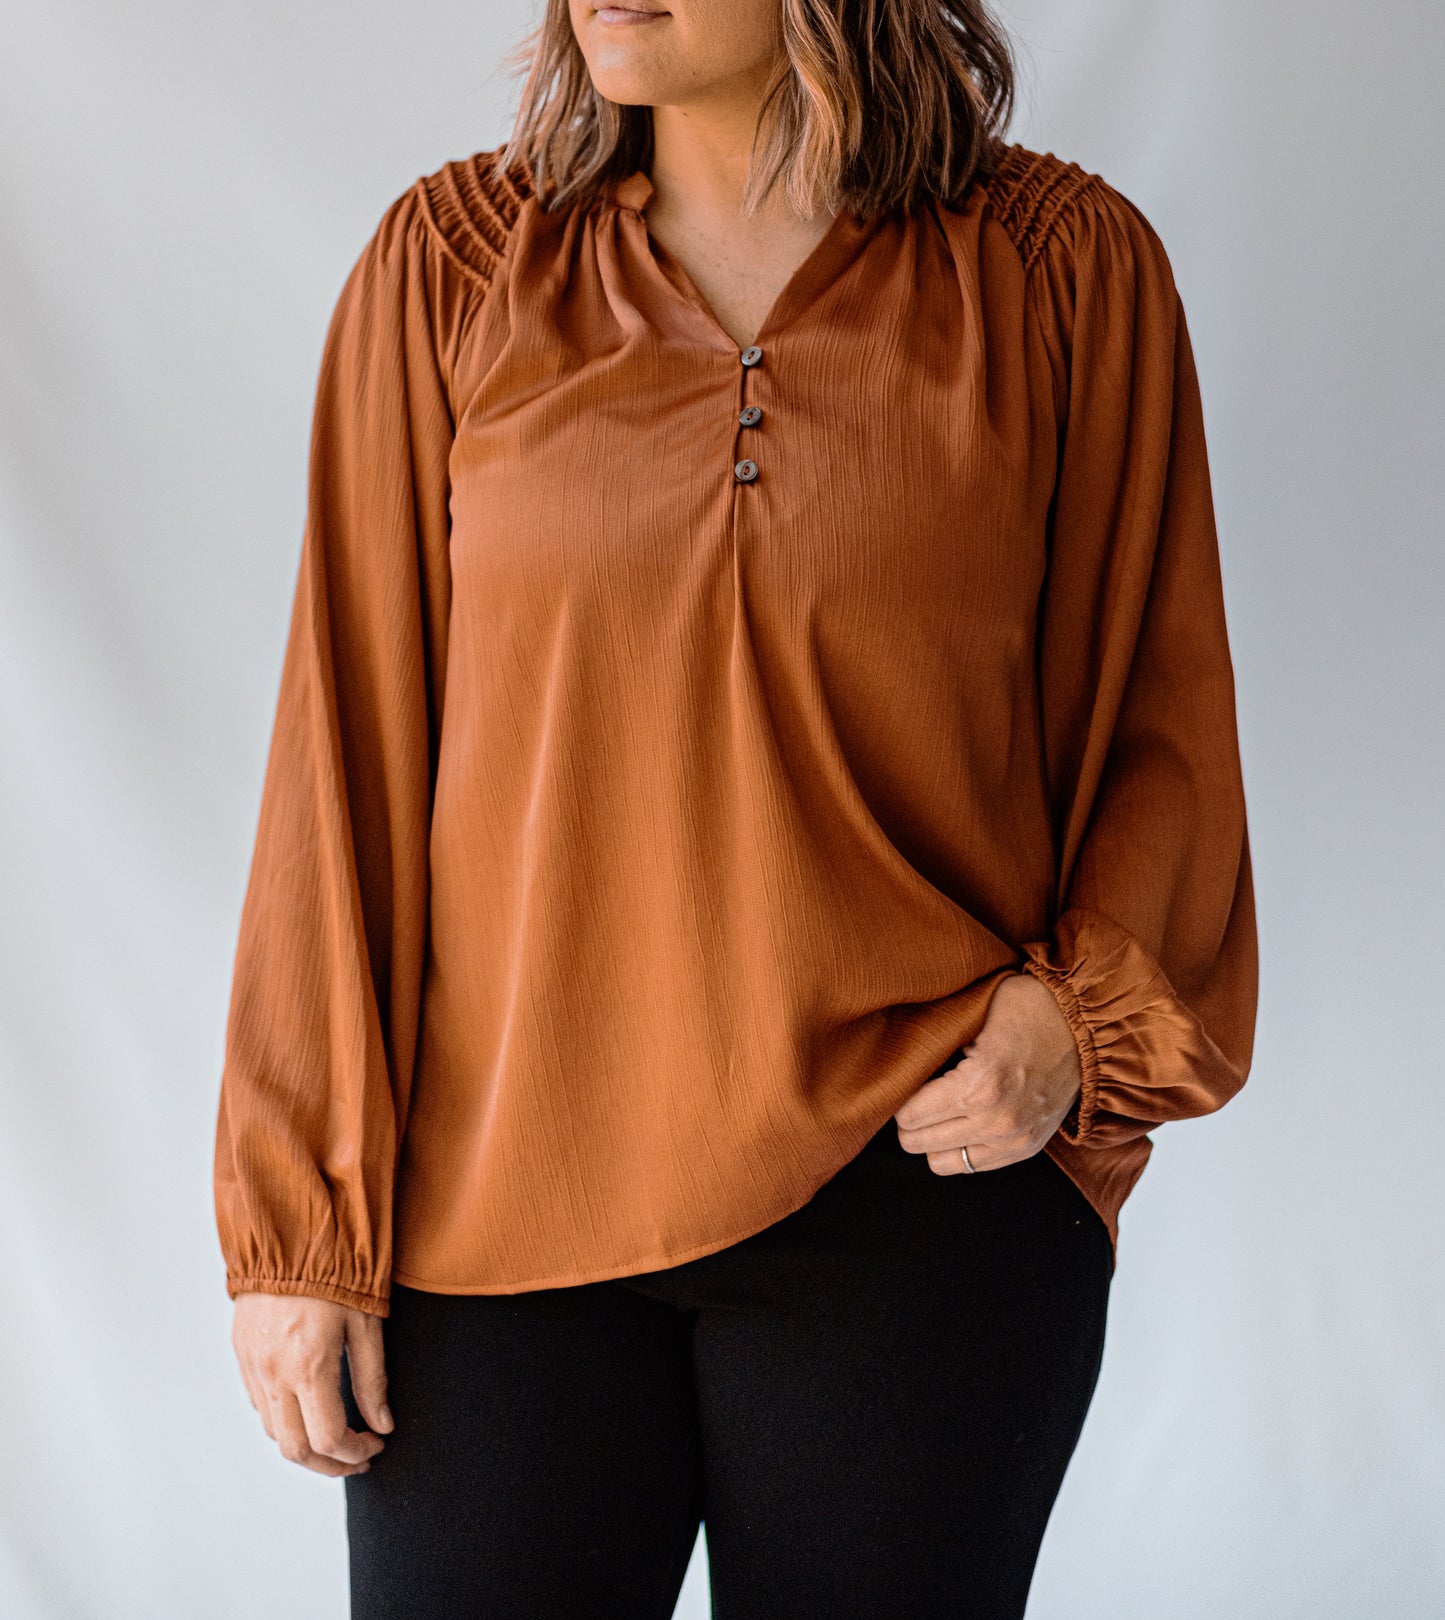 Fall Forever Top